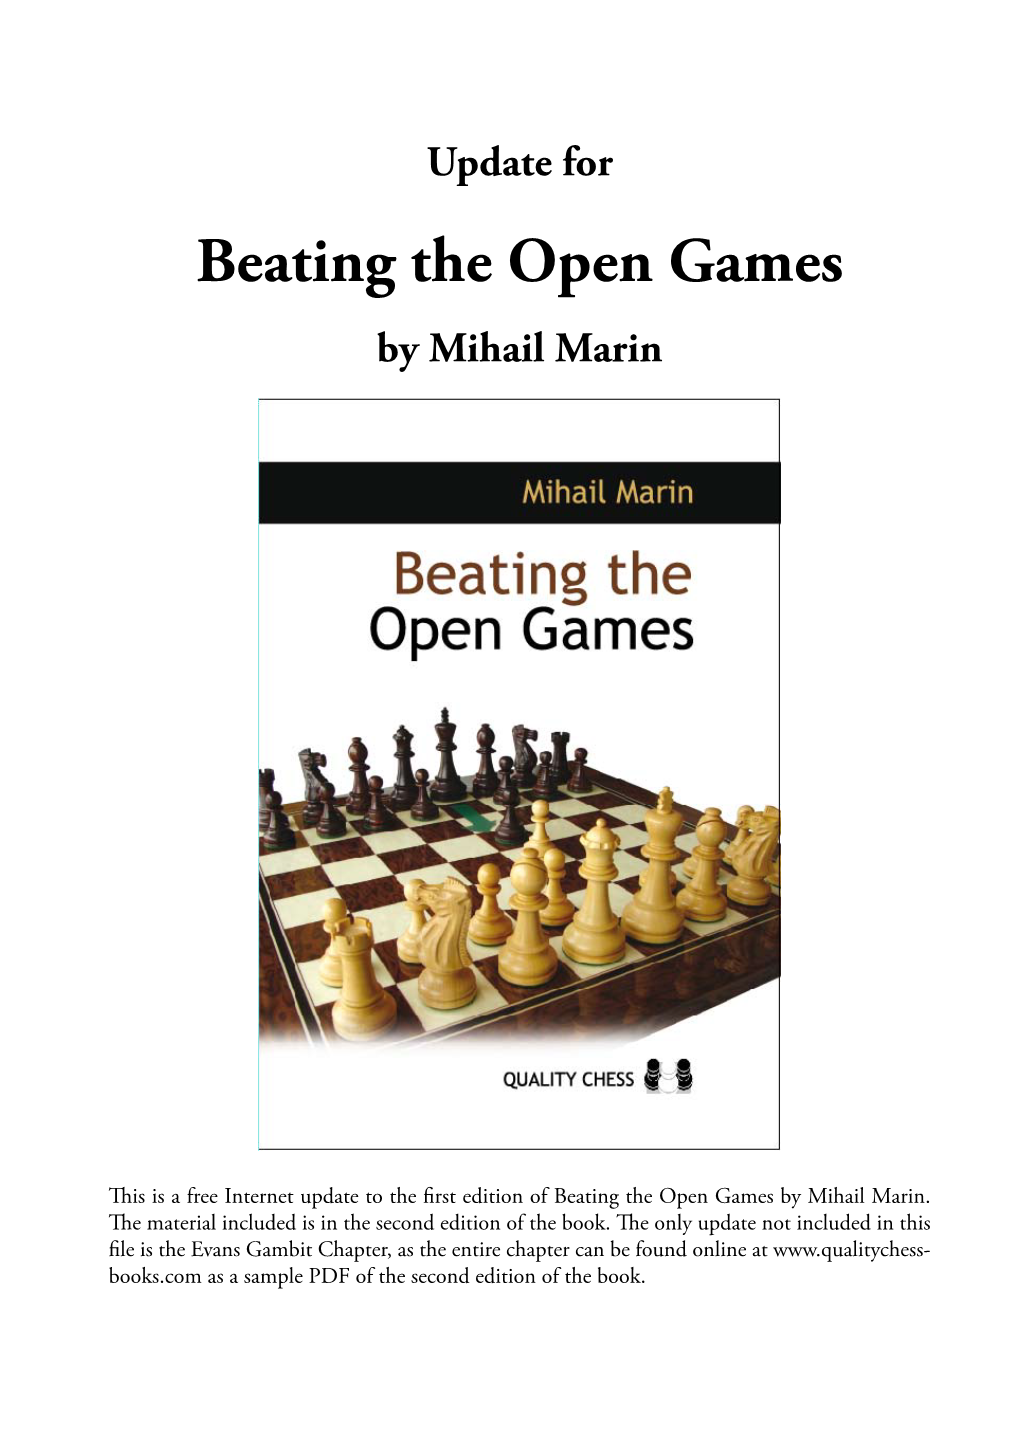 Beating the Open Games by Mihail Marin